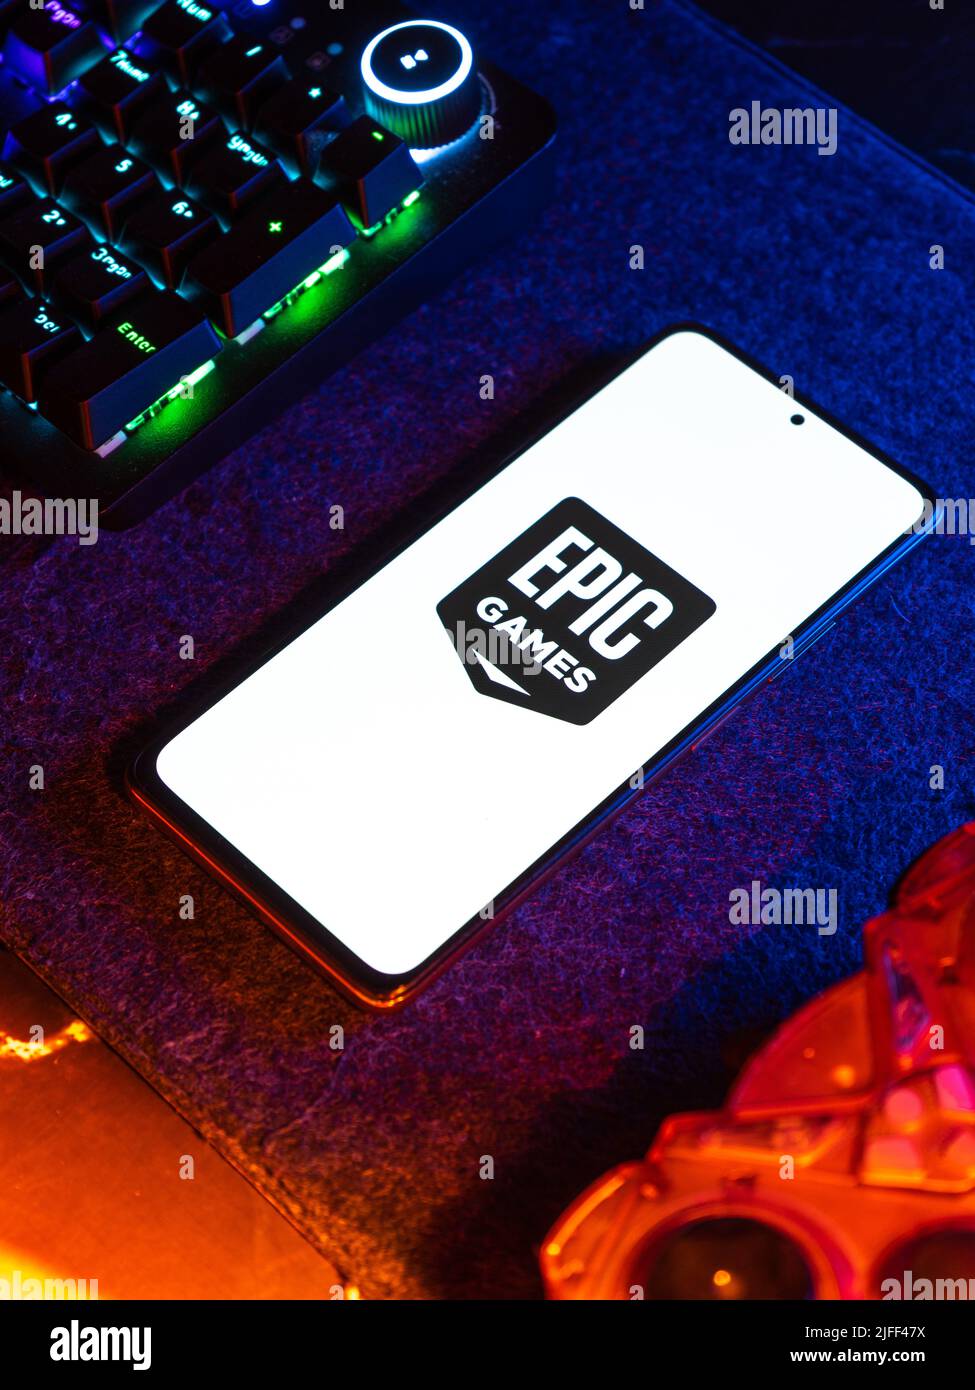 Epic games phone hi-res stock photography and images - Alamy